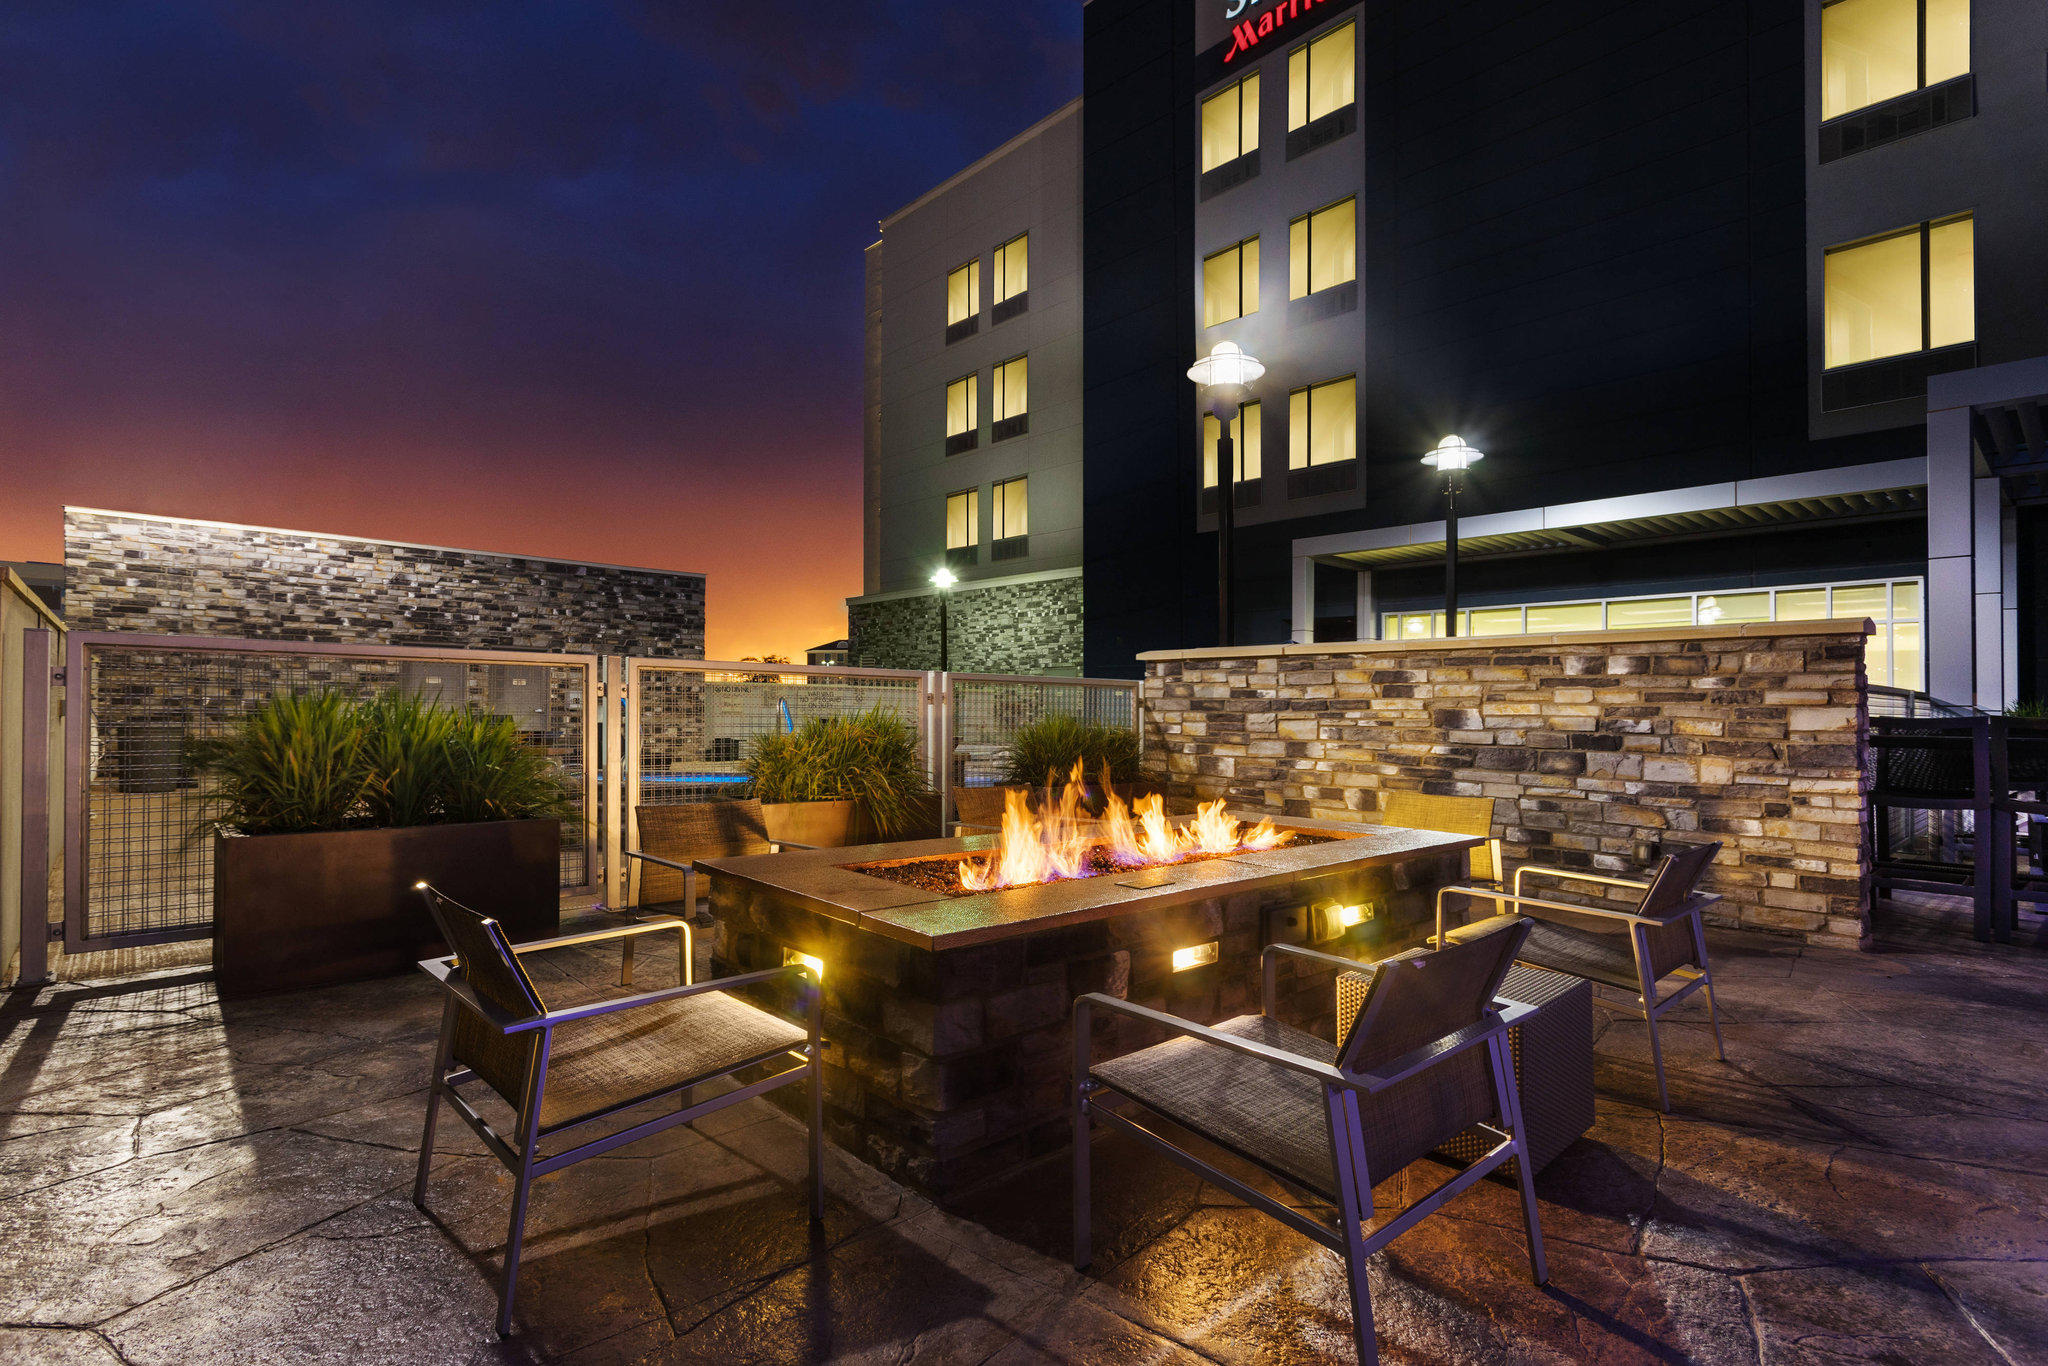 SpringHill Suites by Marriott Midland Odessa Photo